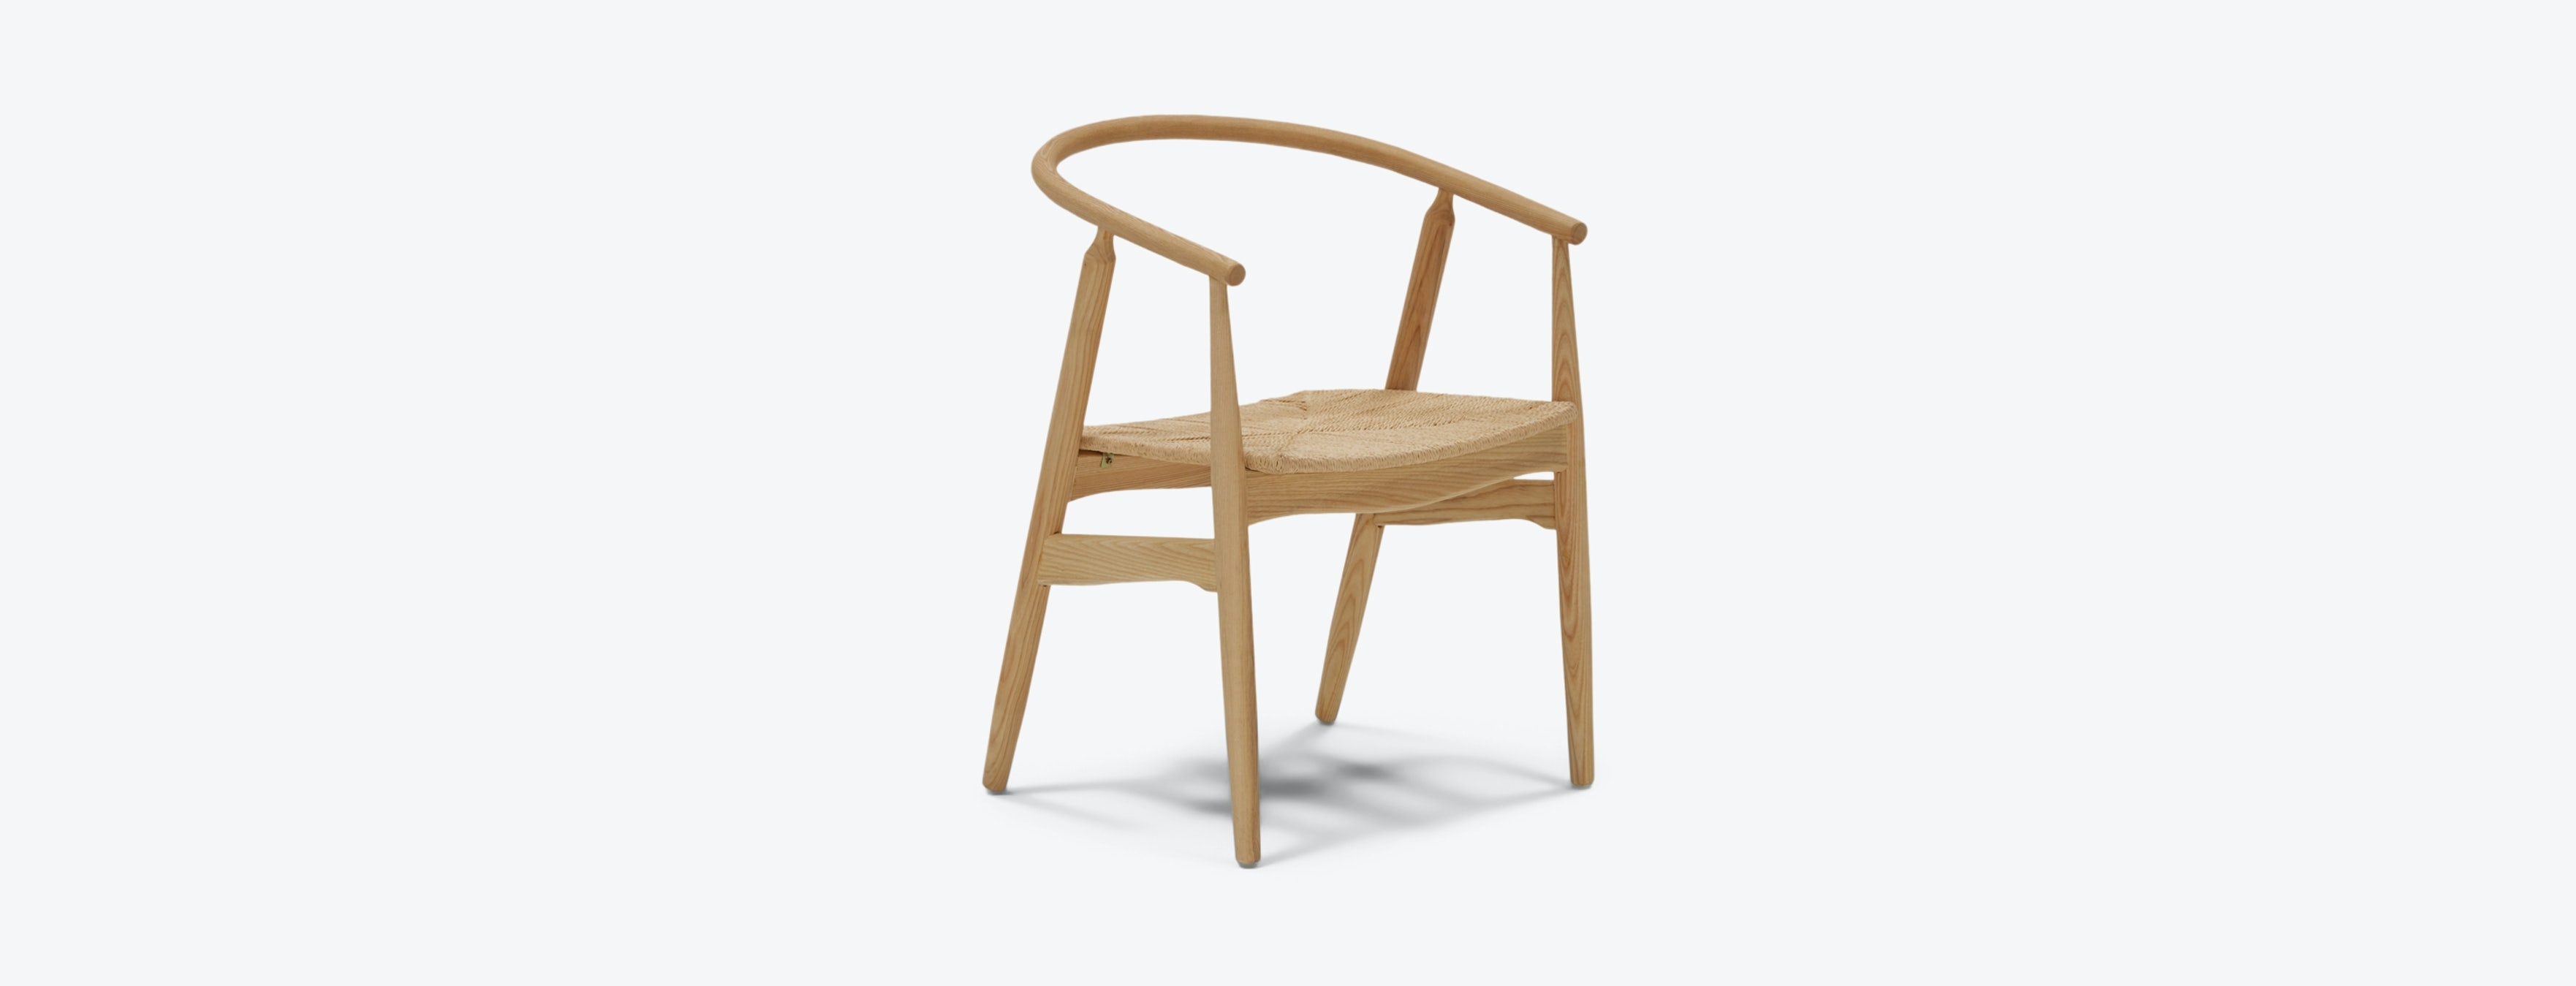 Rayne Dining Chair - Natural - Image 1